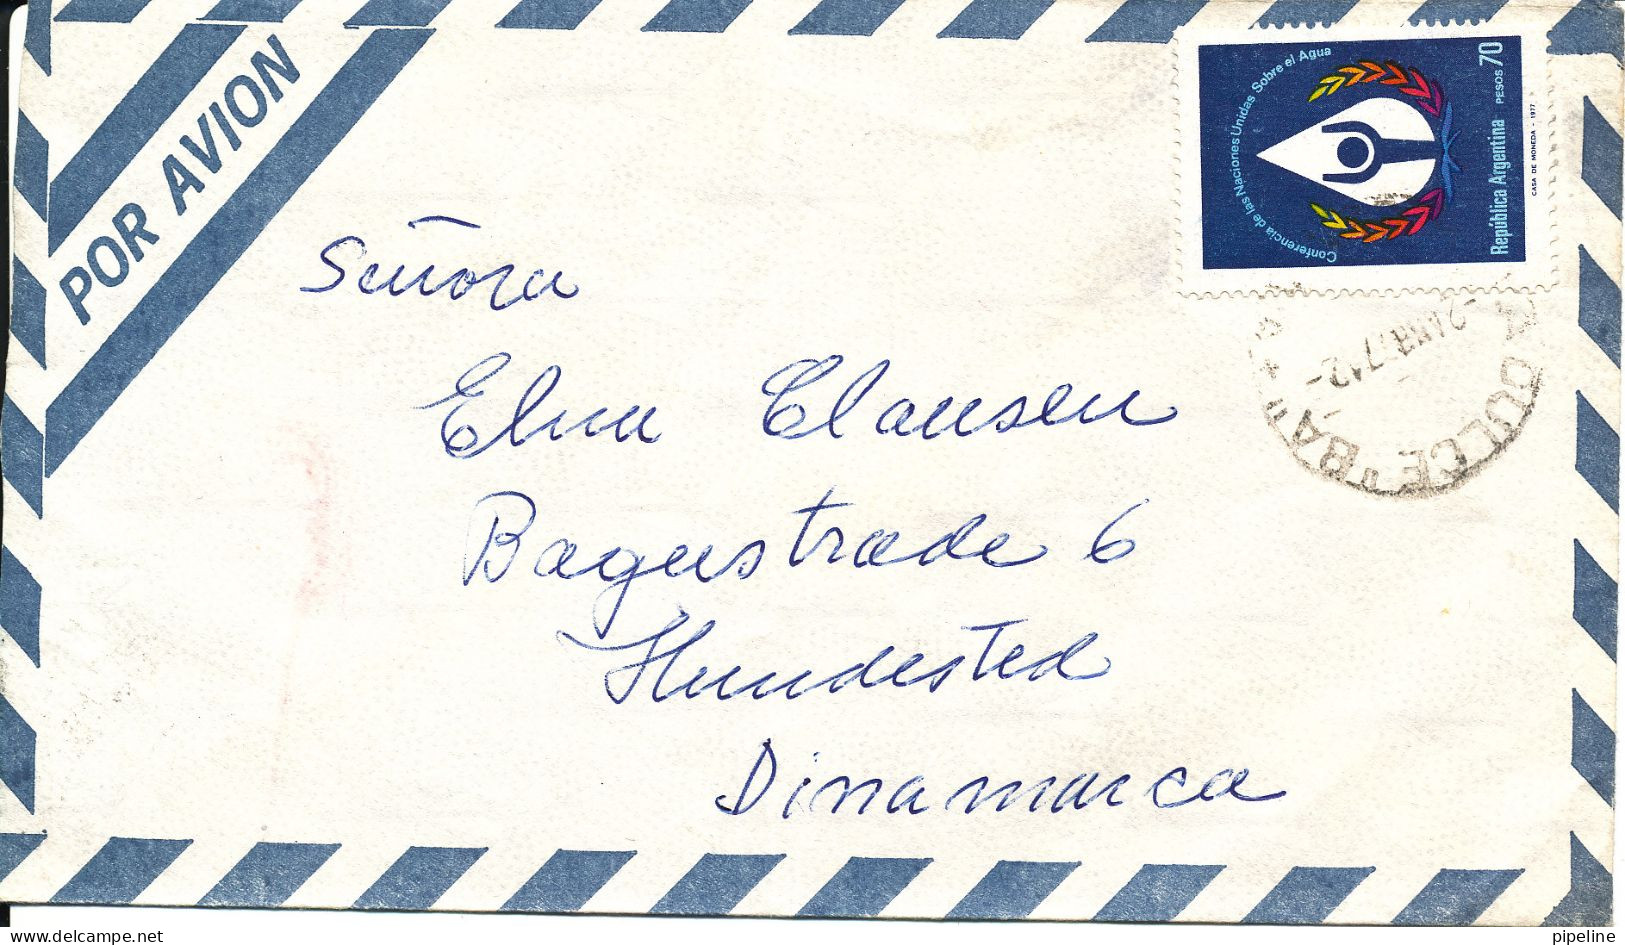 Argentina Air Mail Cover Sent To Denmark 2-4-1977 Single Franked (light Bended Cover) - Luchtpost